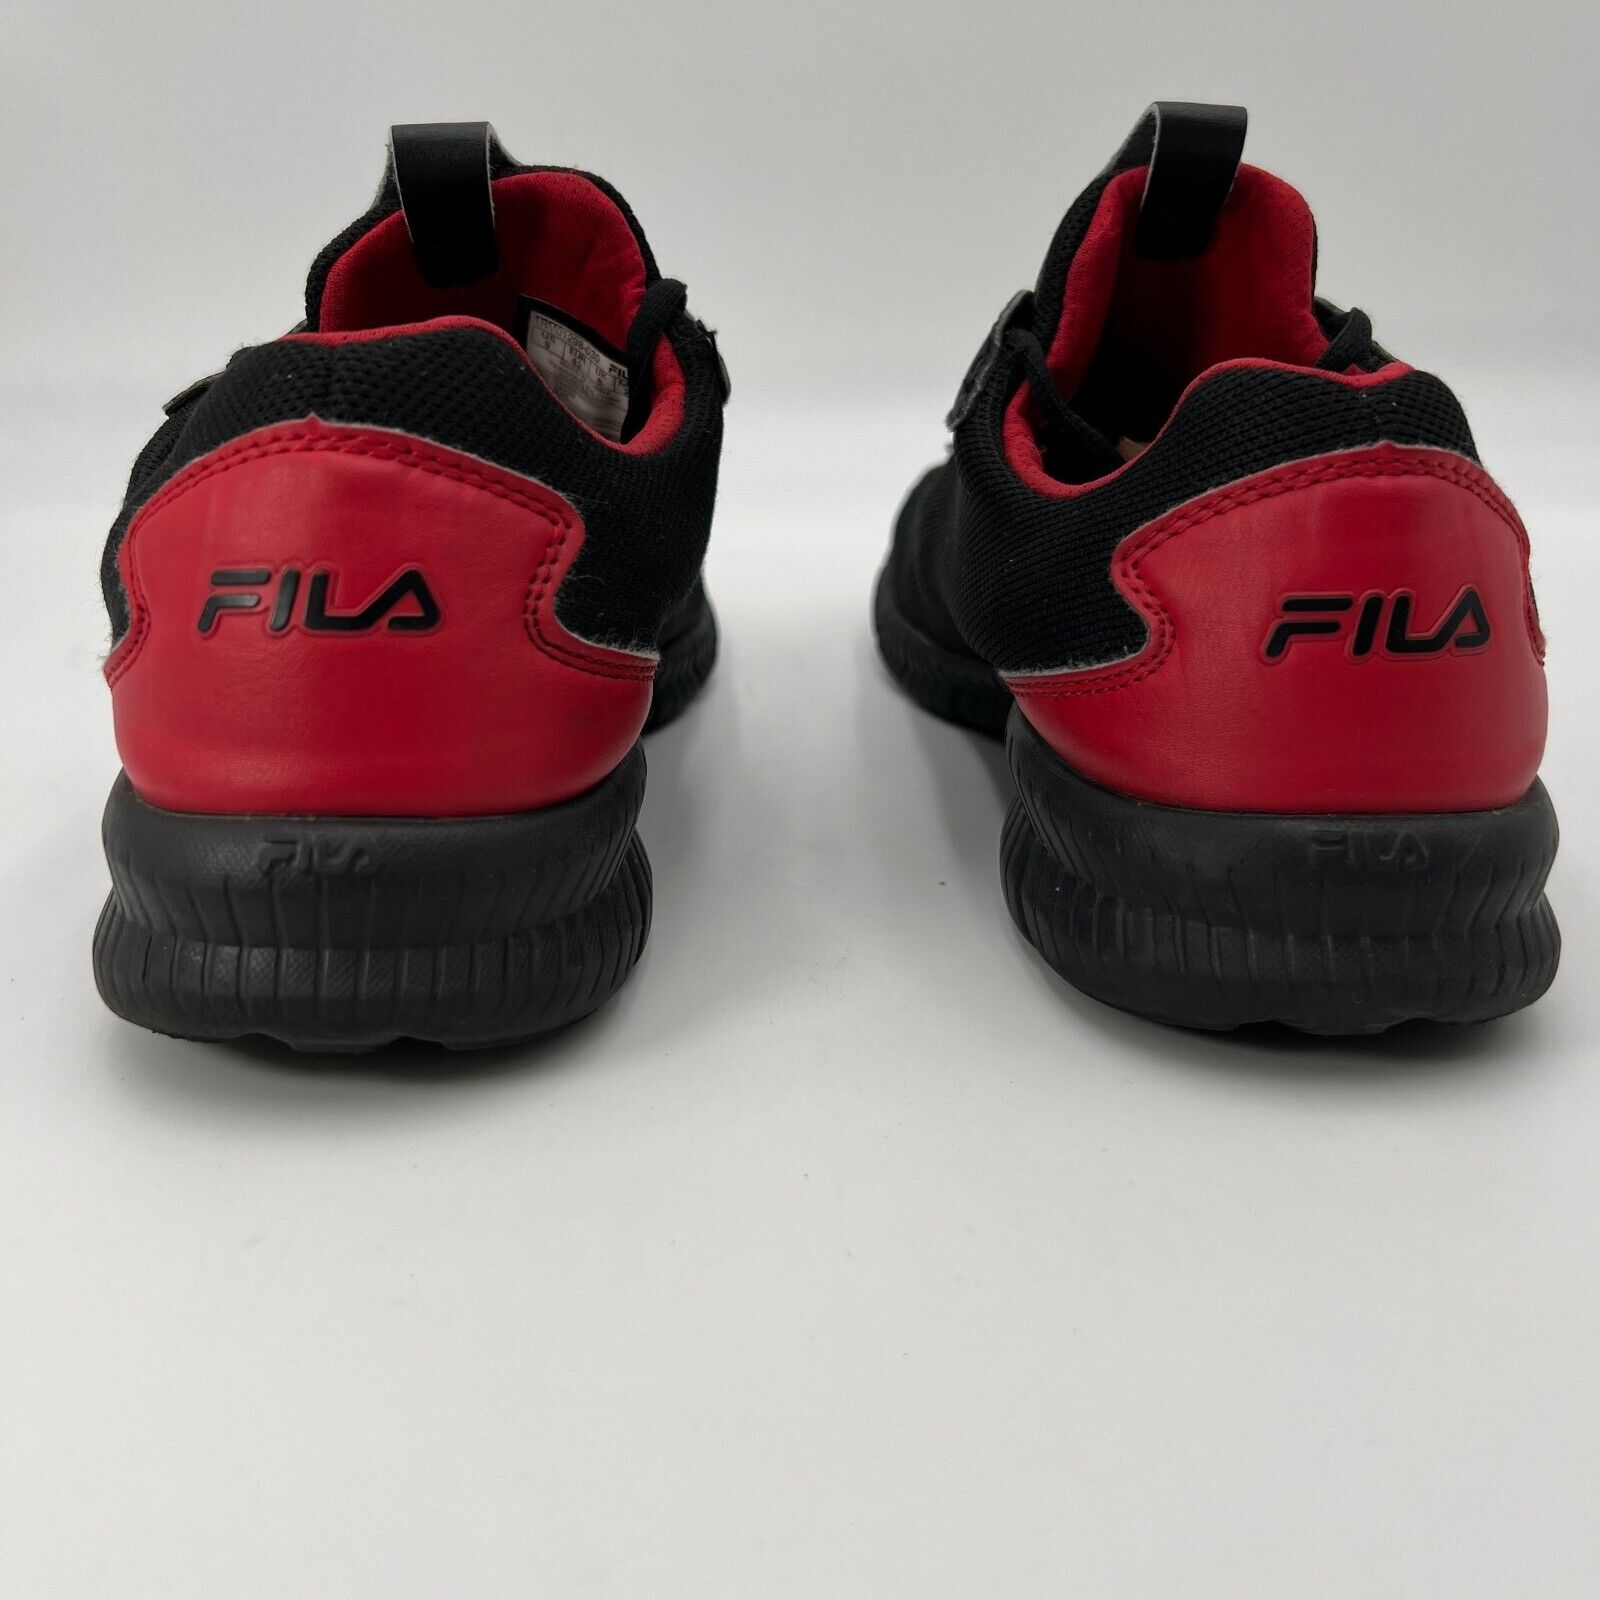 Fila Rare Red Black Oxidation Sneakers Athletic Laced Running Shoe Mens Size 9